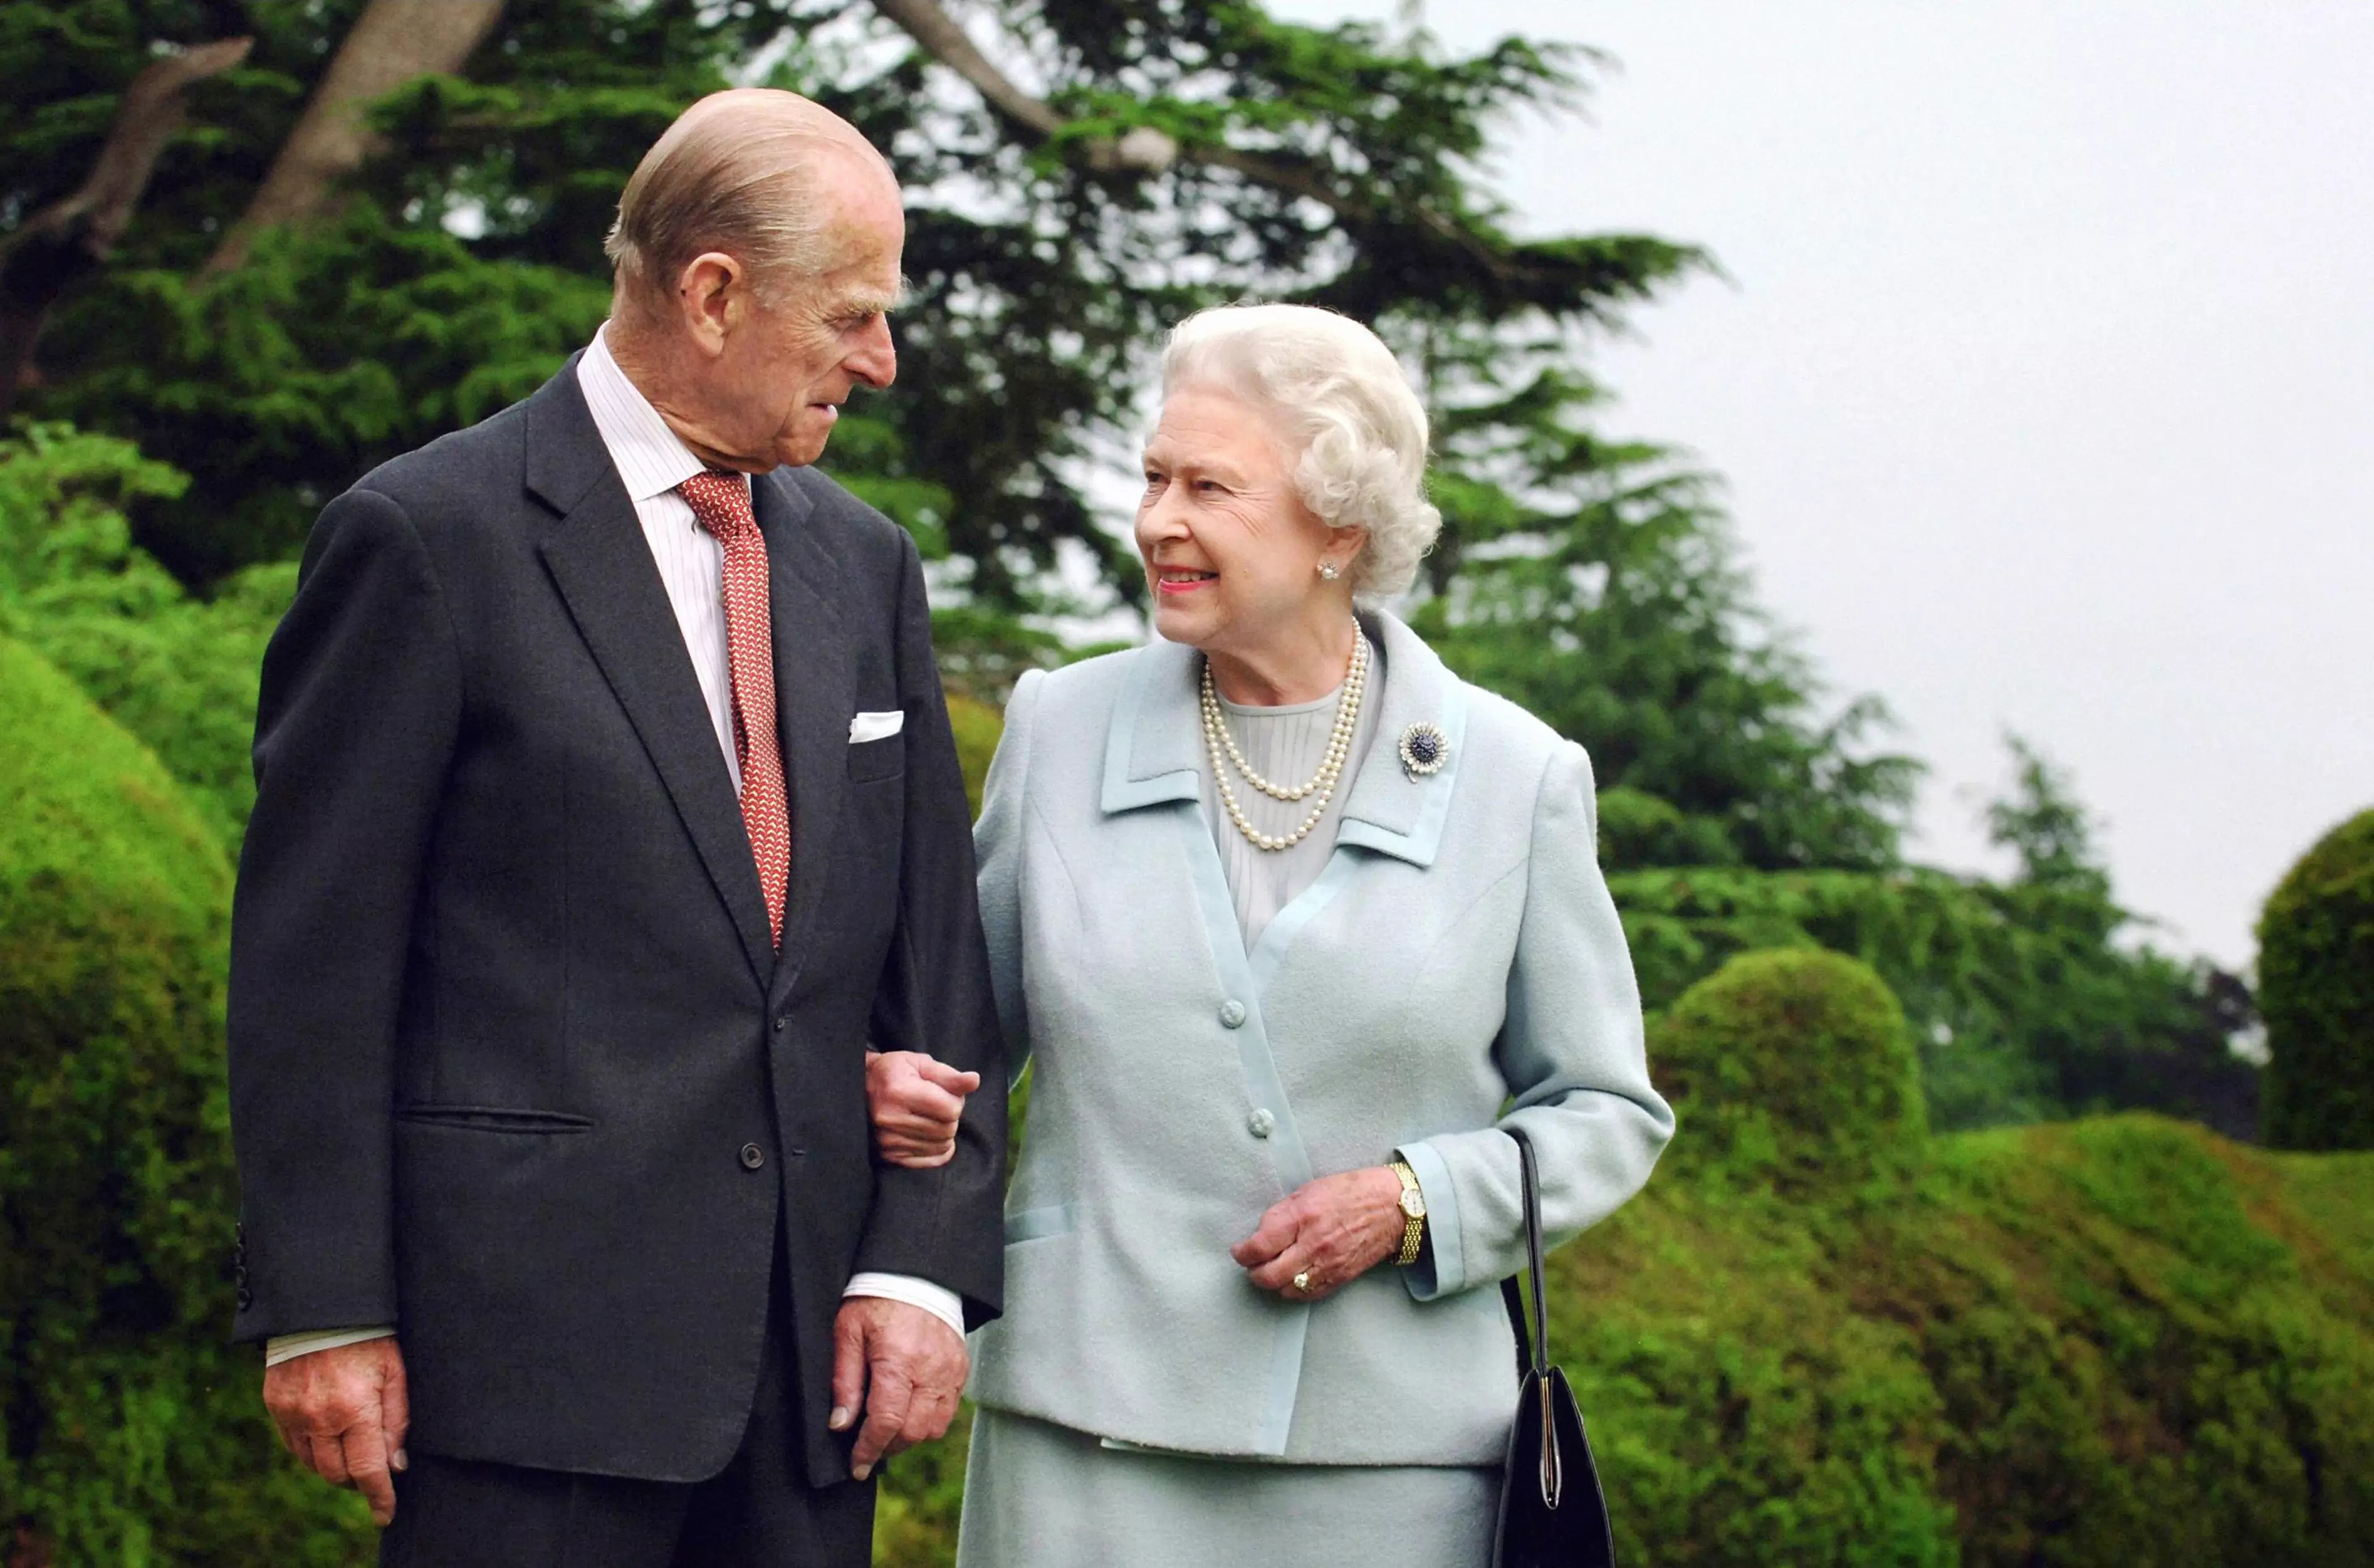 The Queen and Prince Philip on their diamond wedding anniversary in 2007 (